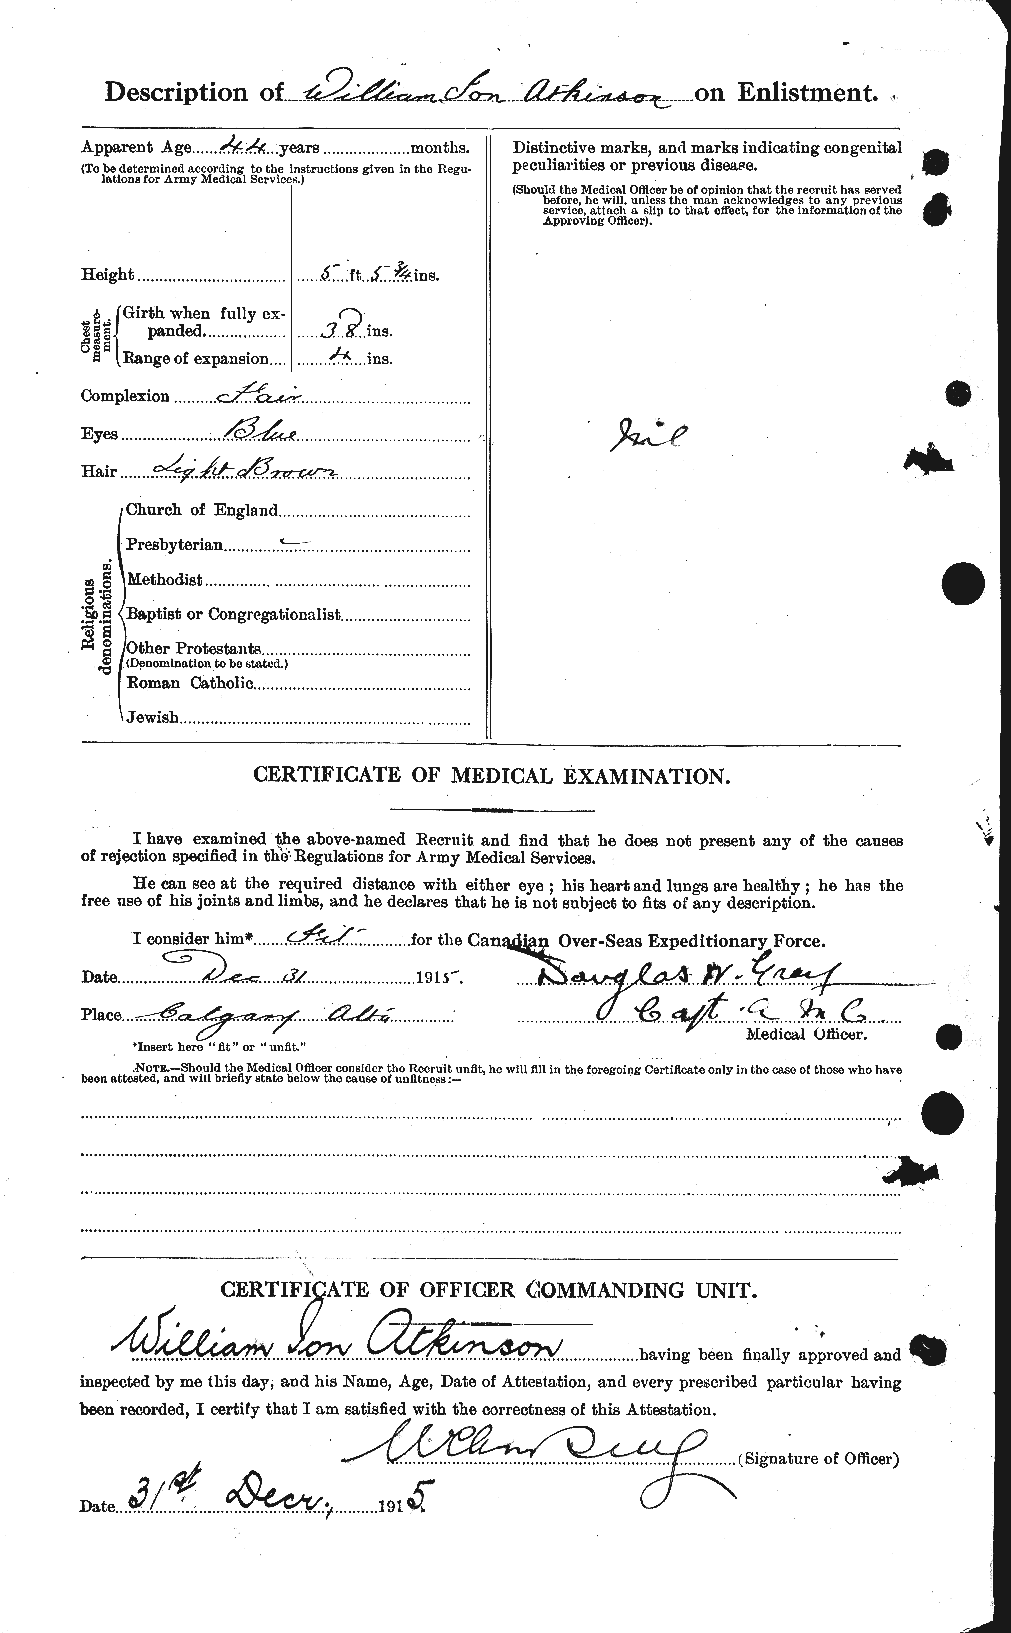 Personnel Records of the First World War - CEF 224173b